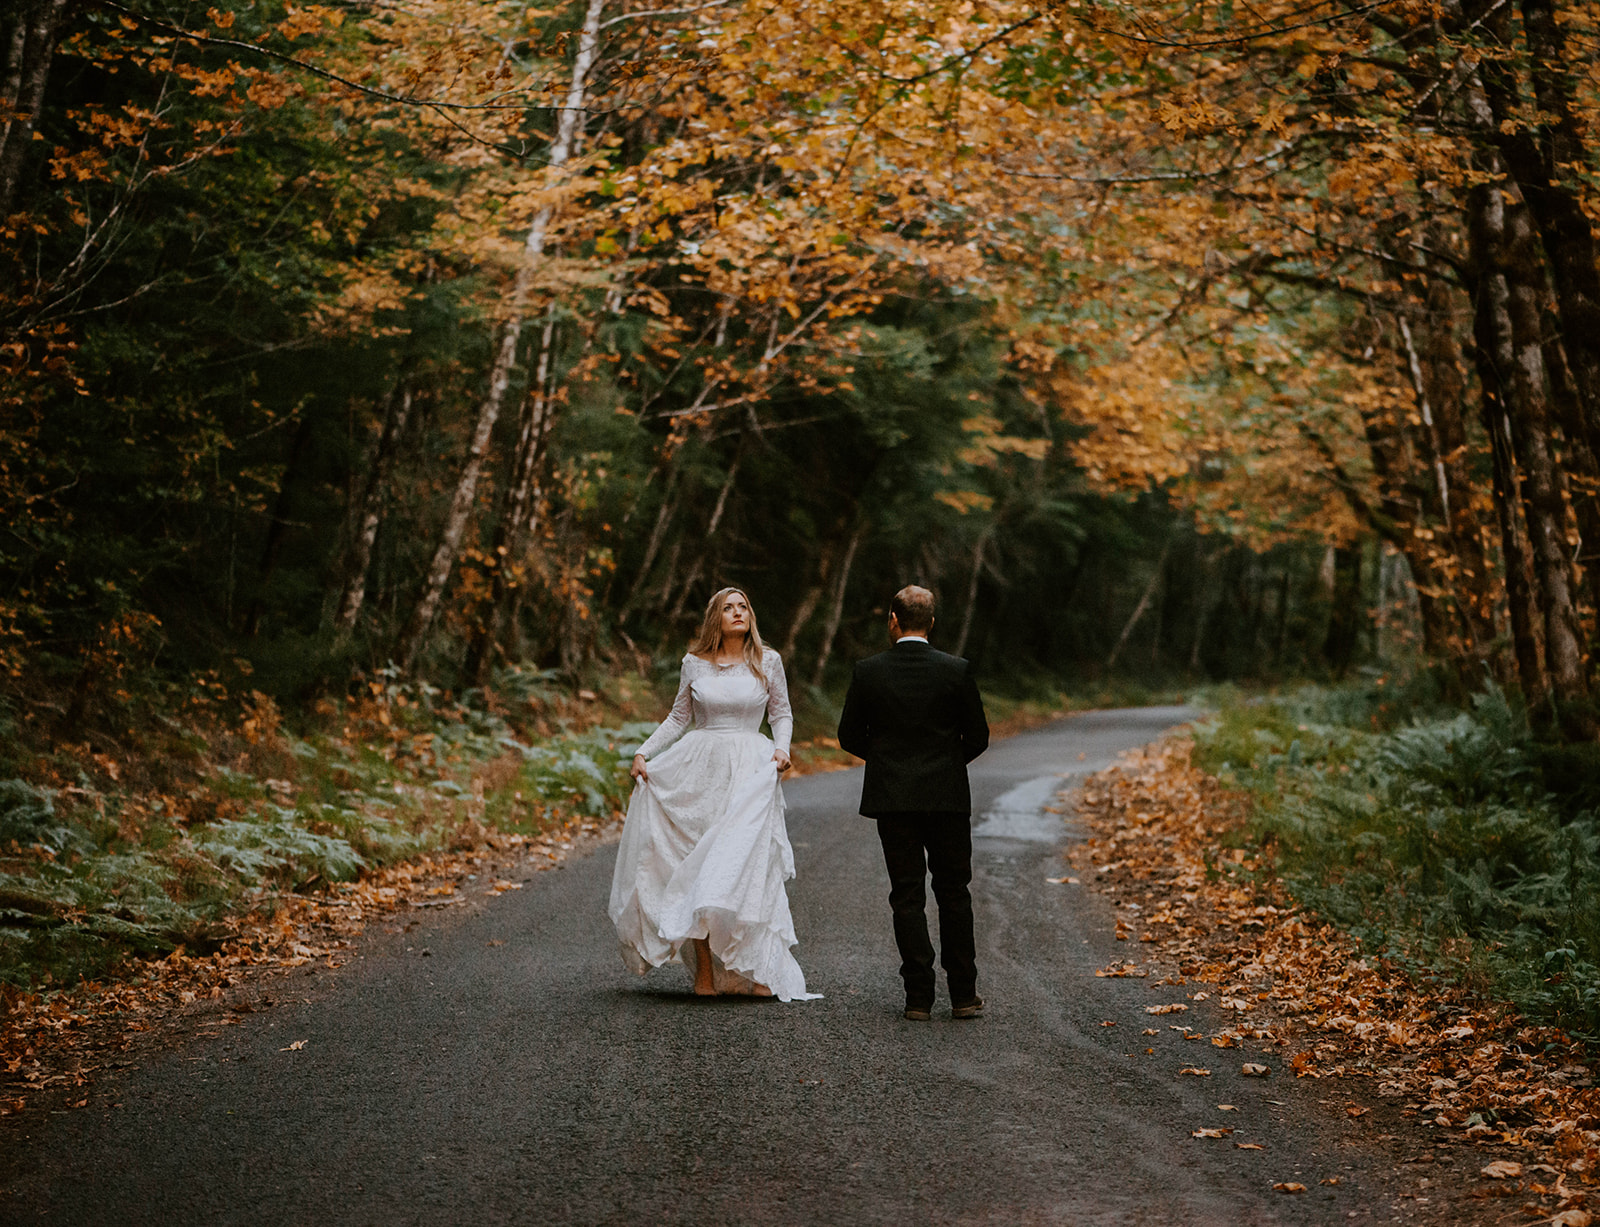 A couple who eloped walking through the autumn leaves in Oregon after they said their vows.